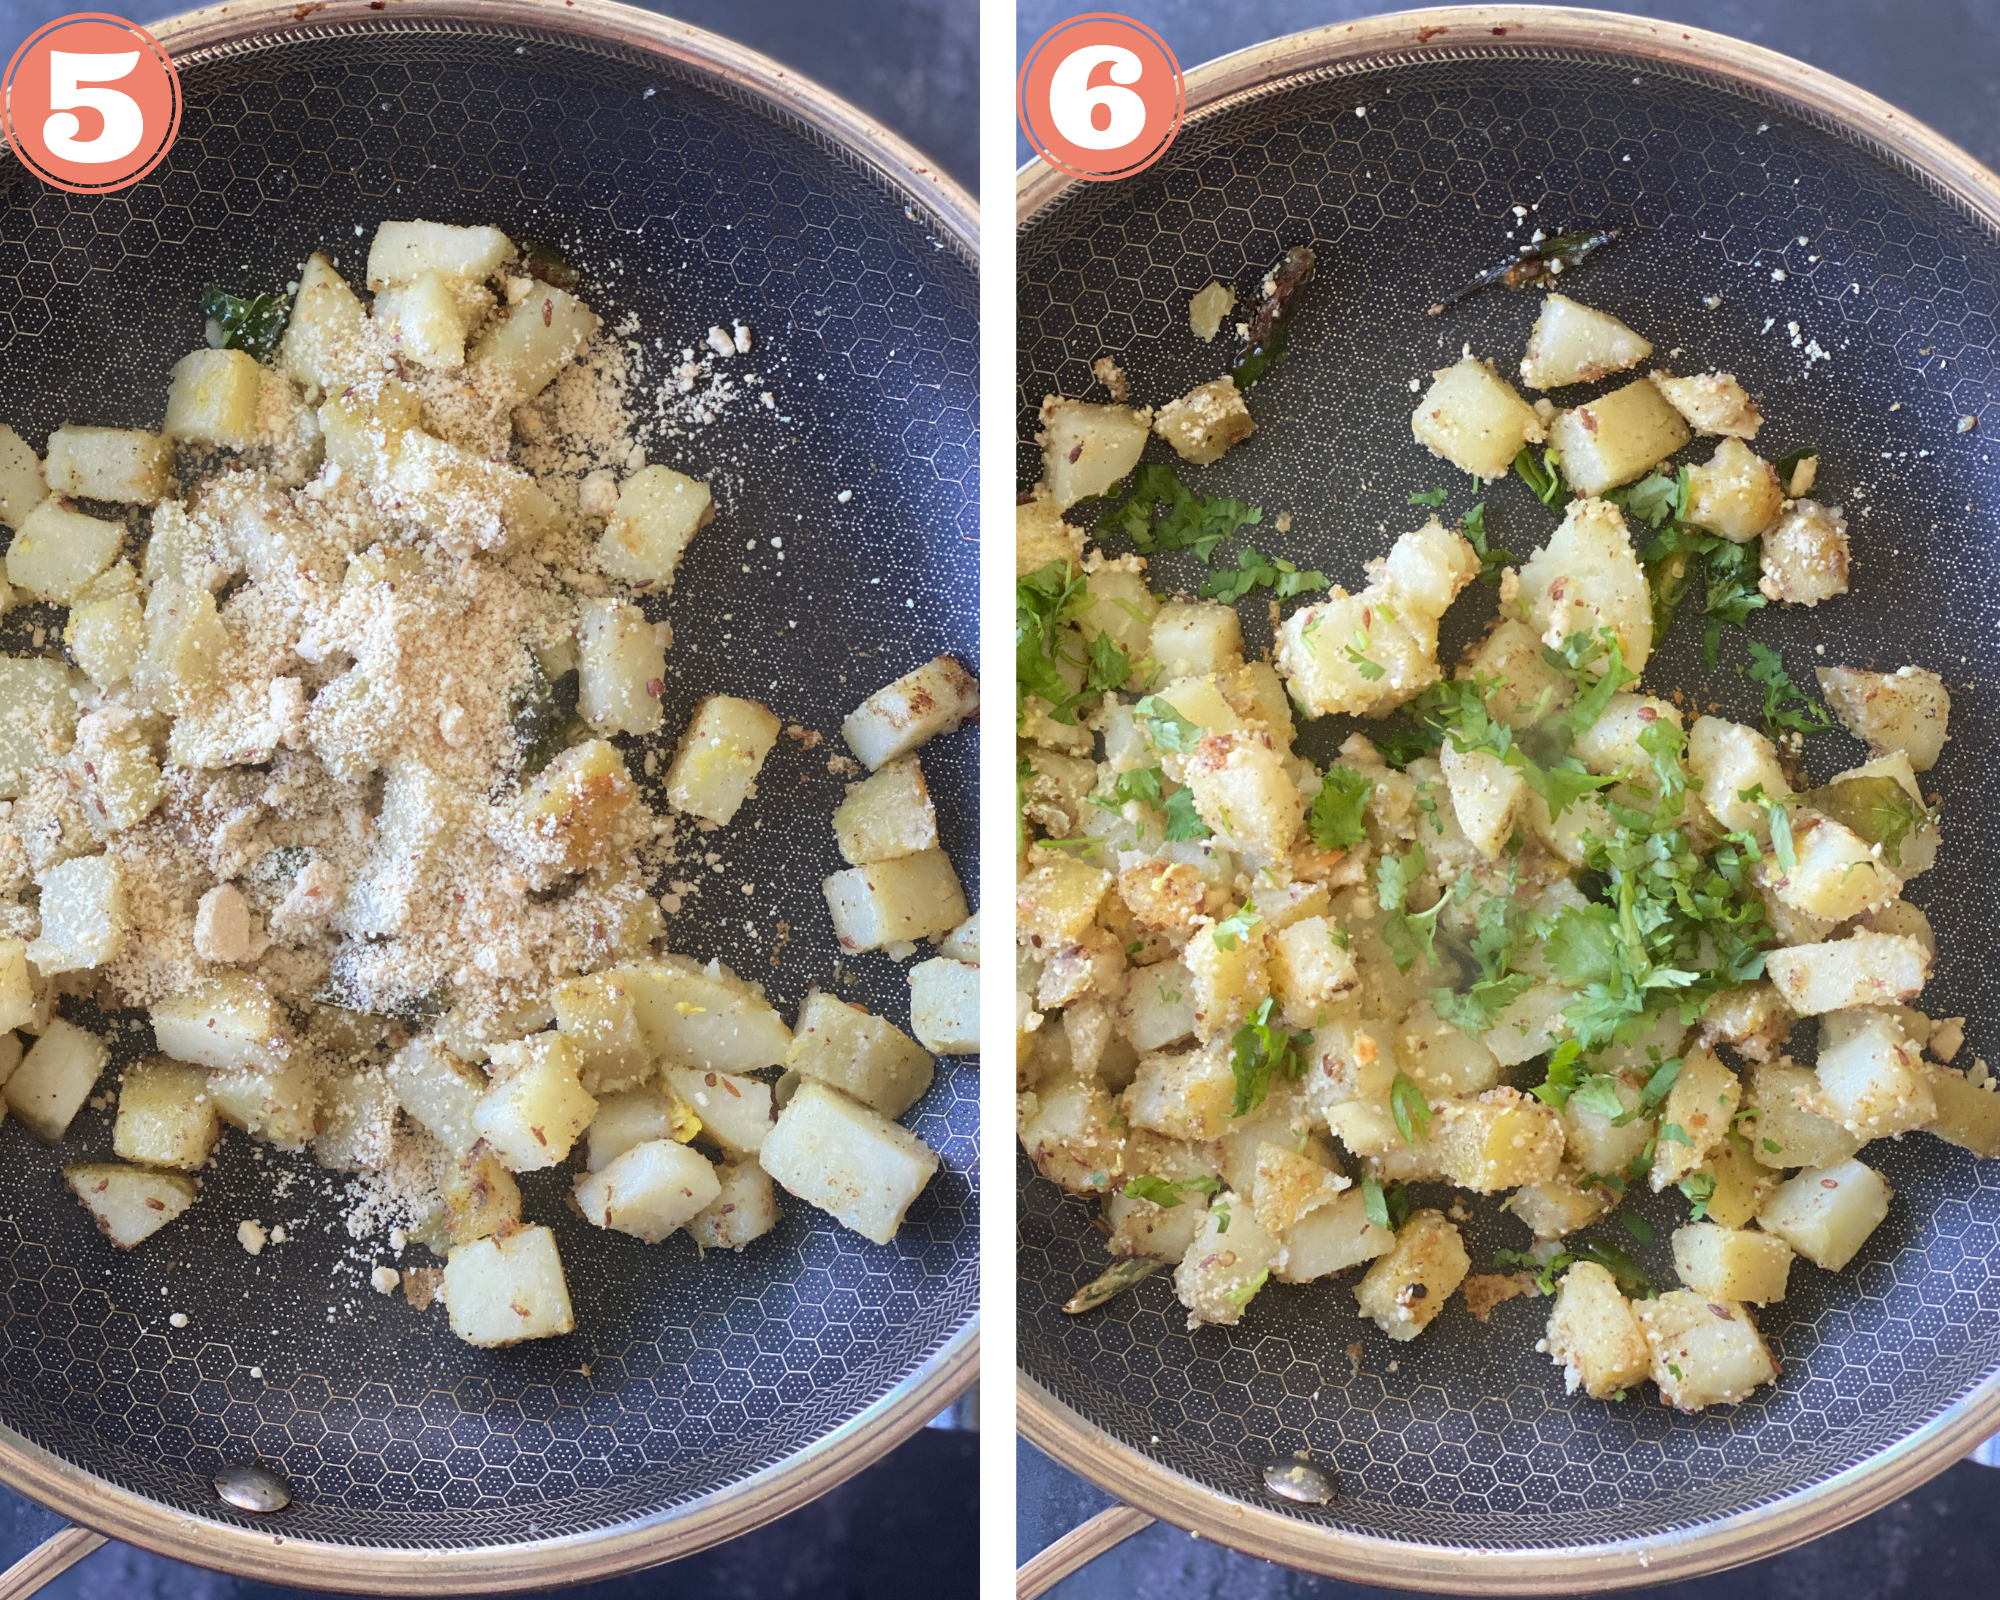 Collage steps to make vrat waale aloo; cooking the potatoes with peanuts and adding cilantro. 